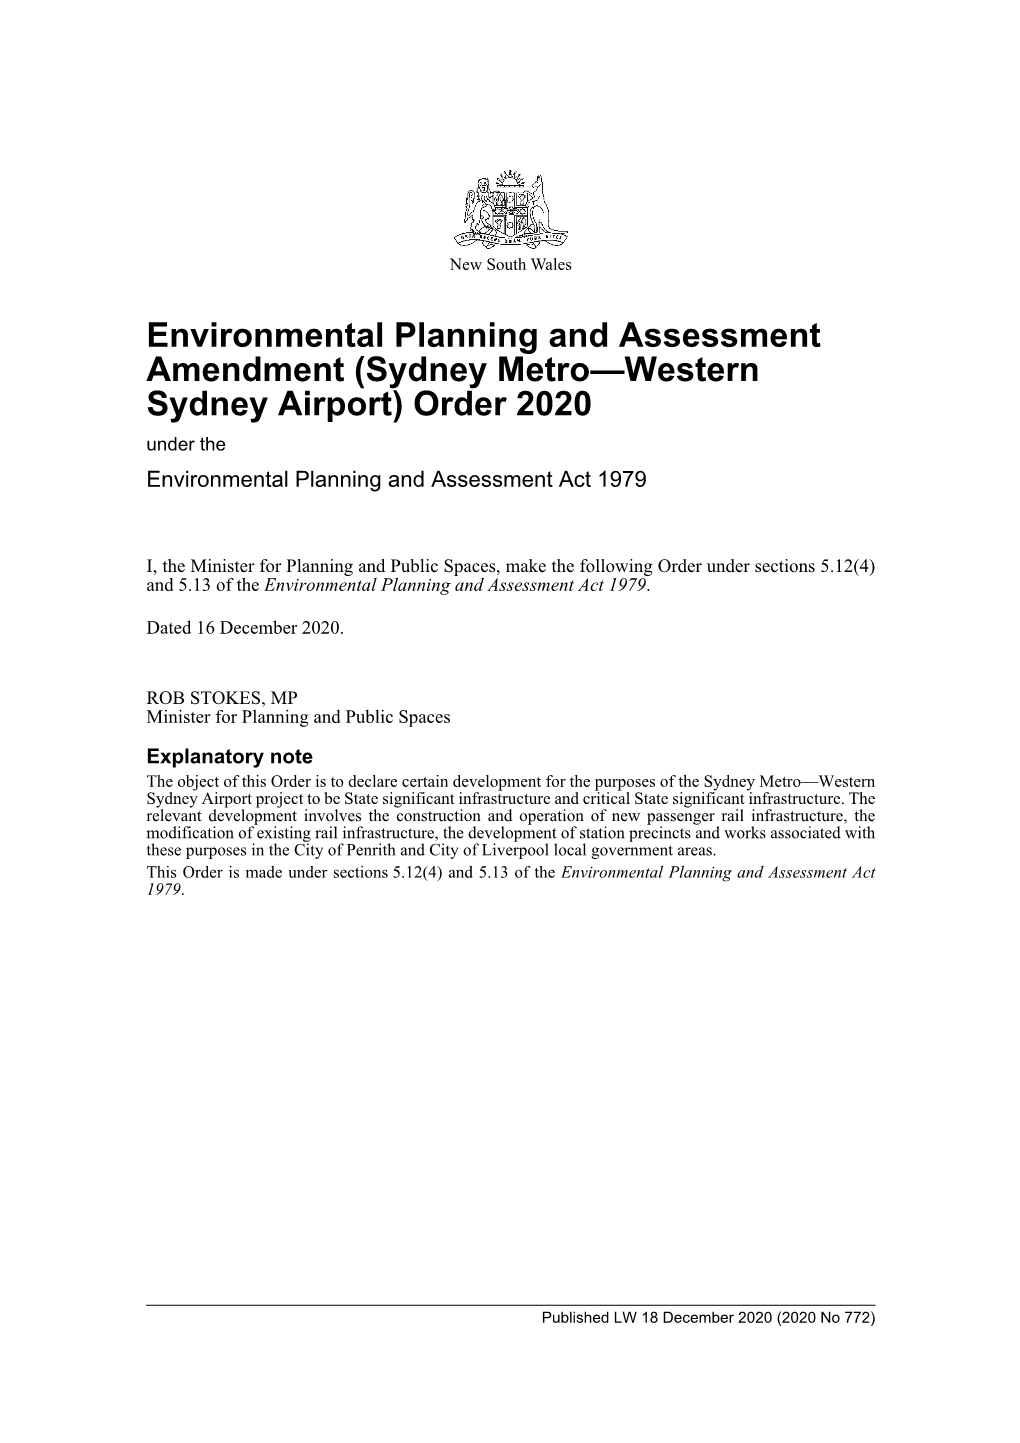 (Sydney Metro—Western Sydney Airport) Order 2020 Under the Environmental Planning and Assessment Act 1979